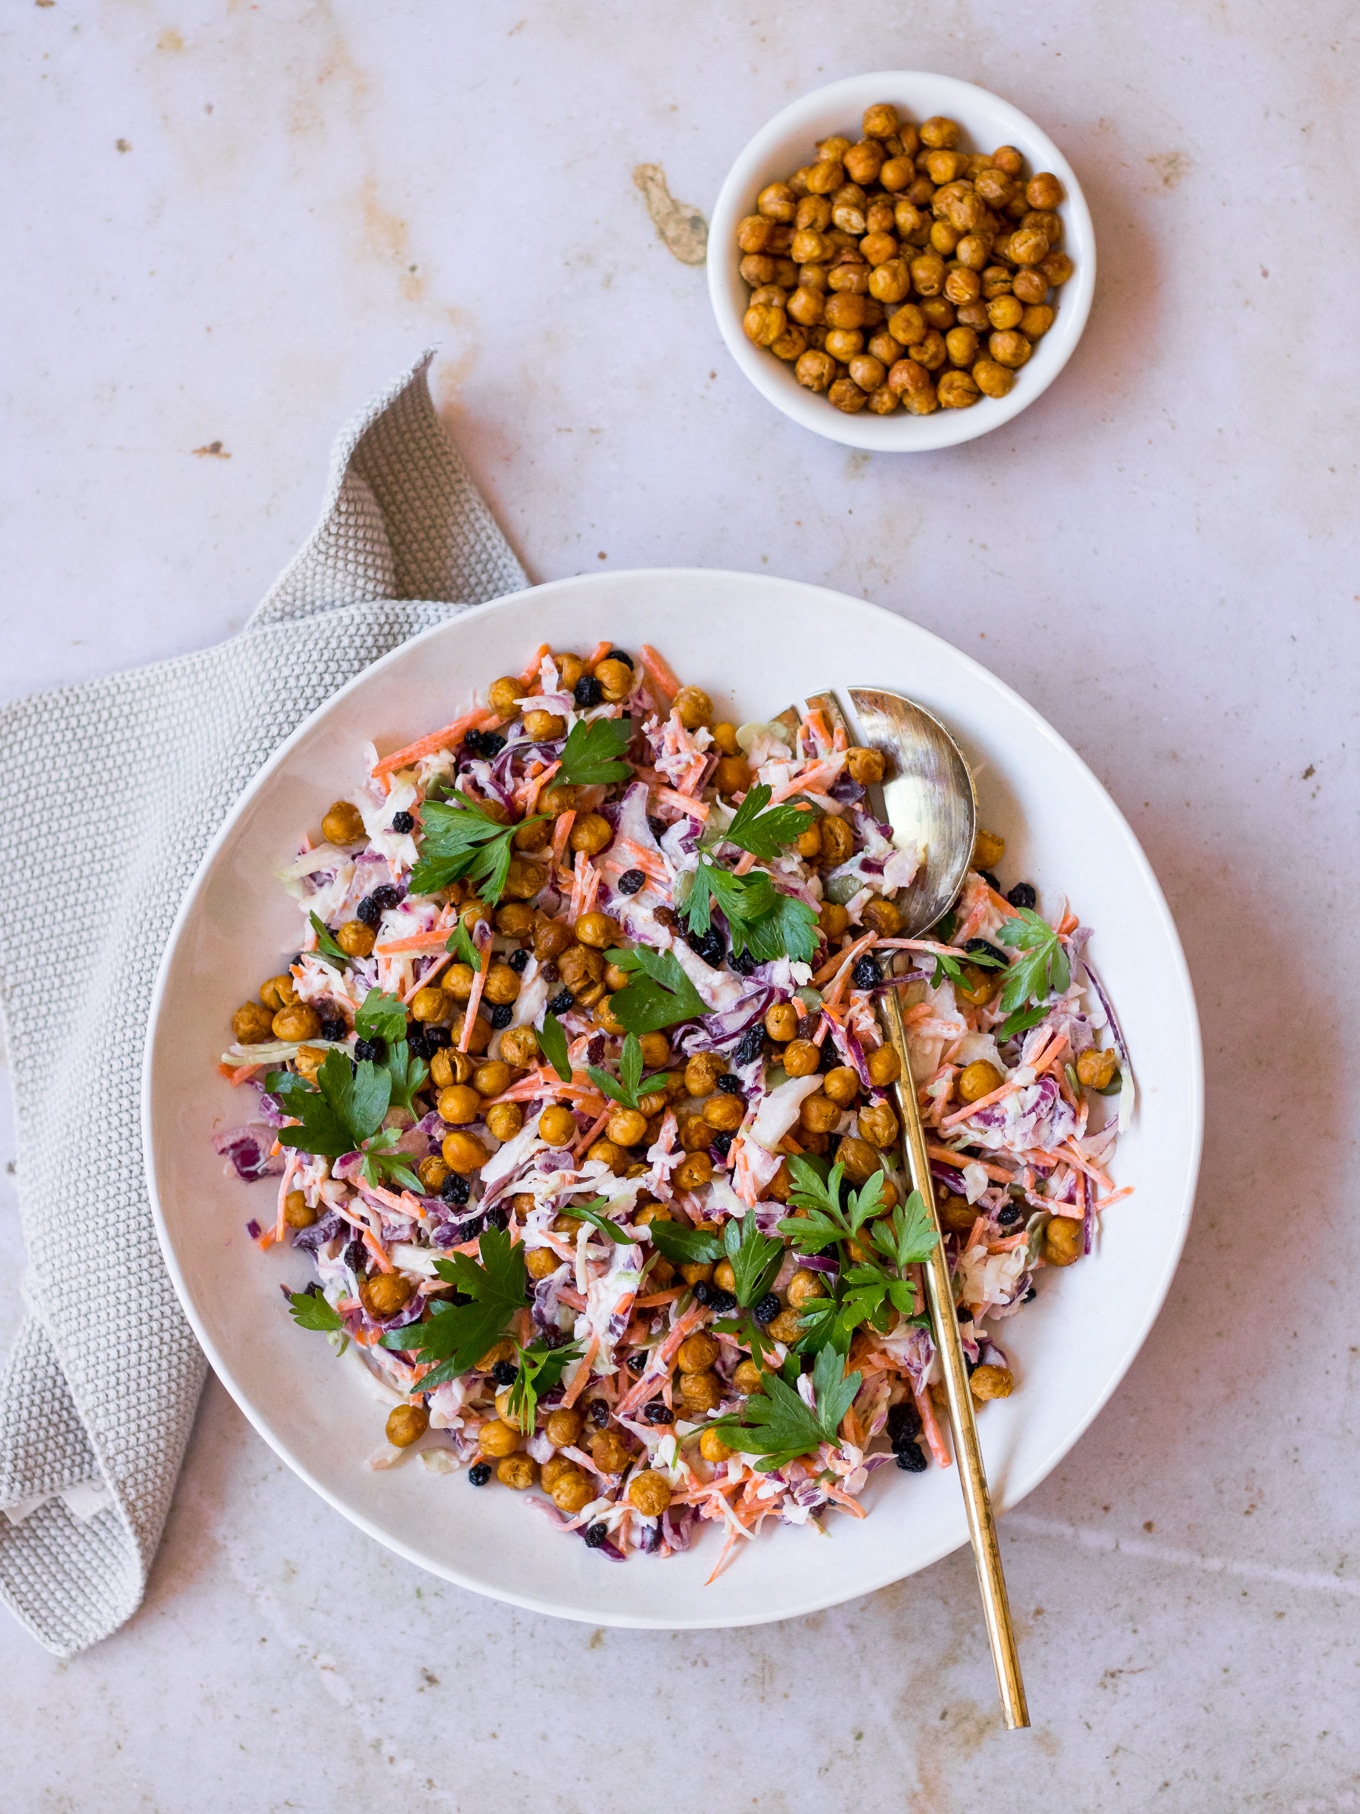 Yoghurt Coleslaw with Roasted Chickpeas a recipe by Nourish Every Day